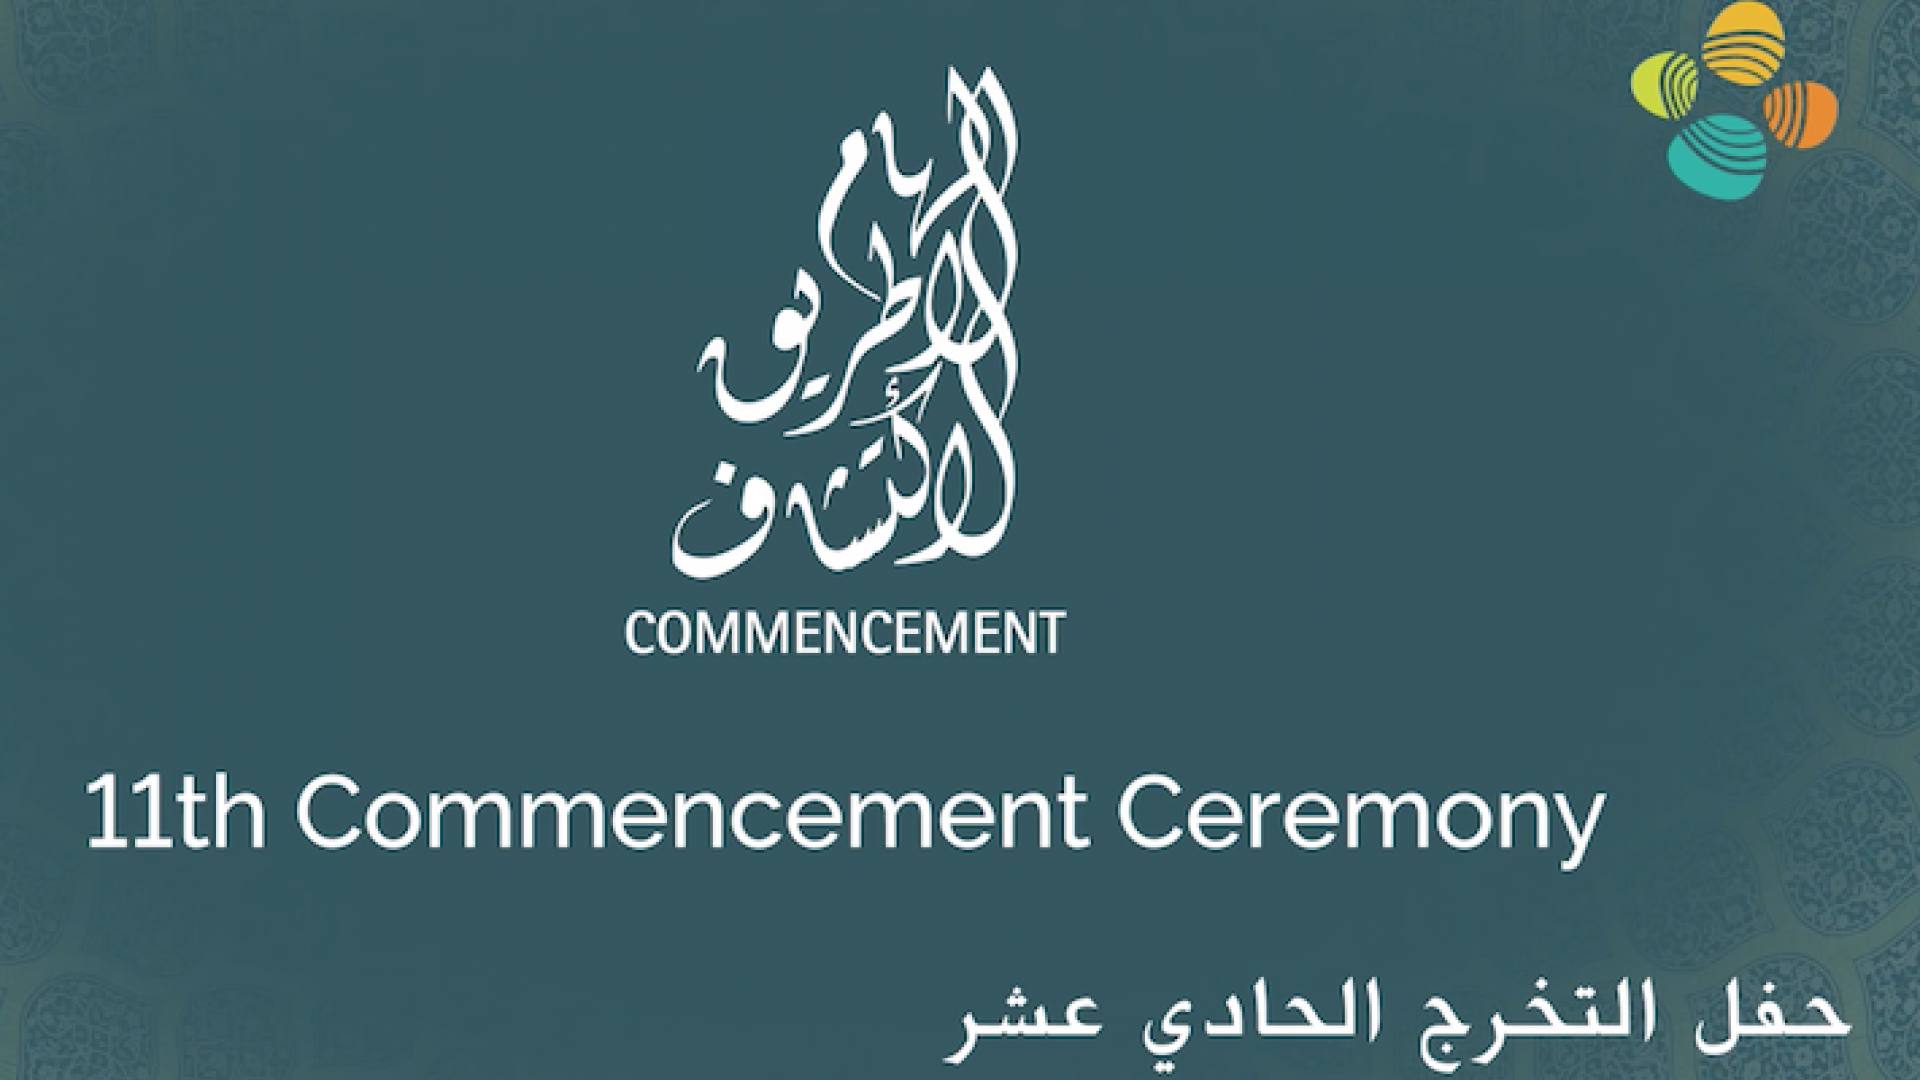 KAUST 11th Commencement Ceremony